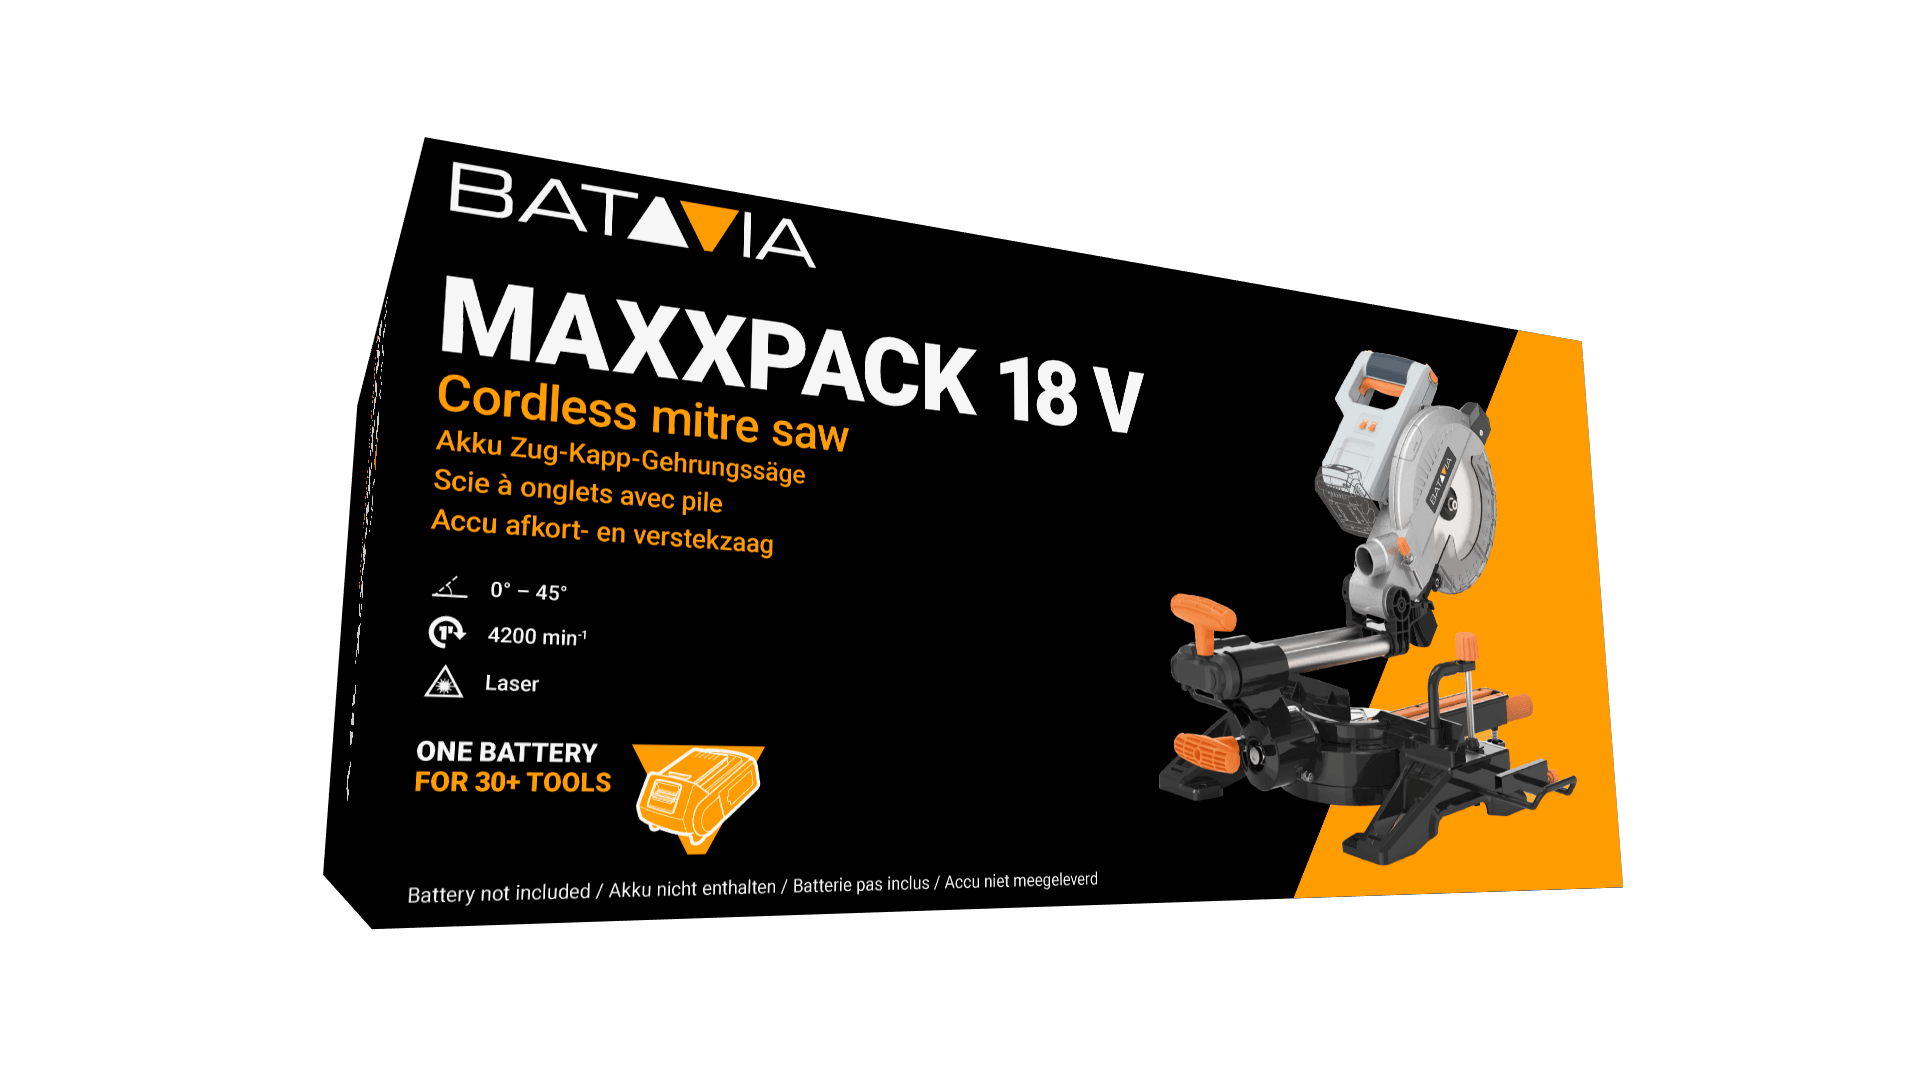 Packaging Sliding Mitre Saw | Maxxpack collection | Batavia